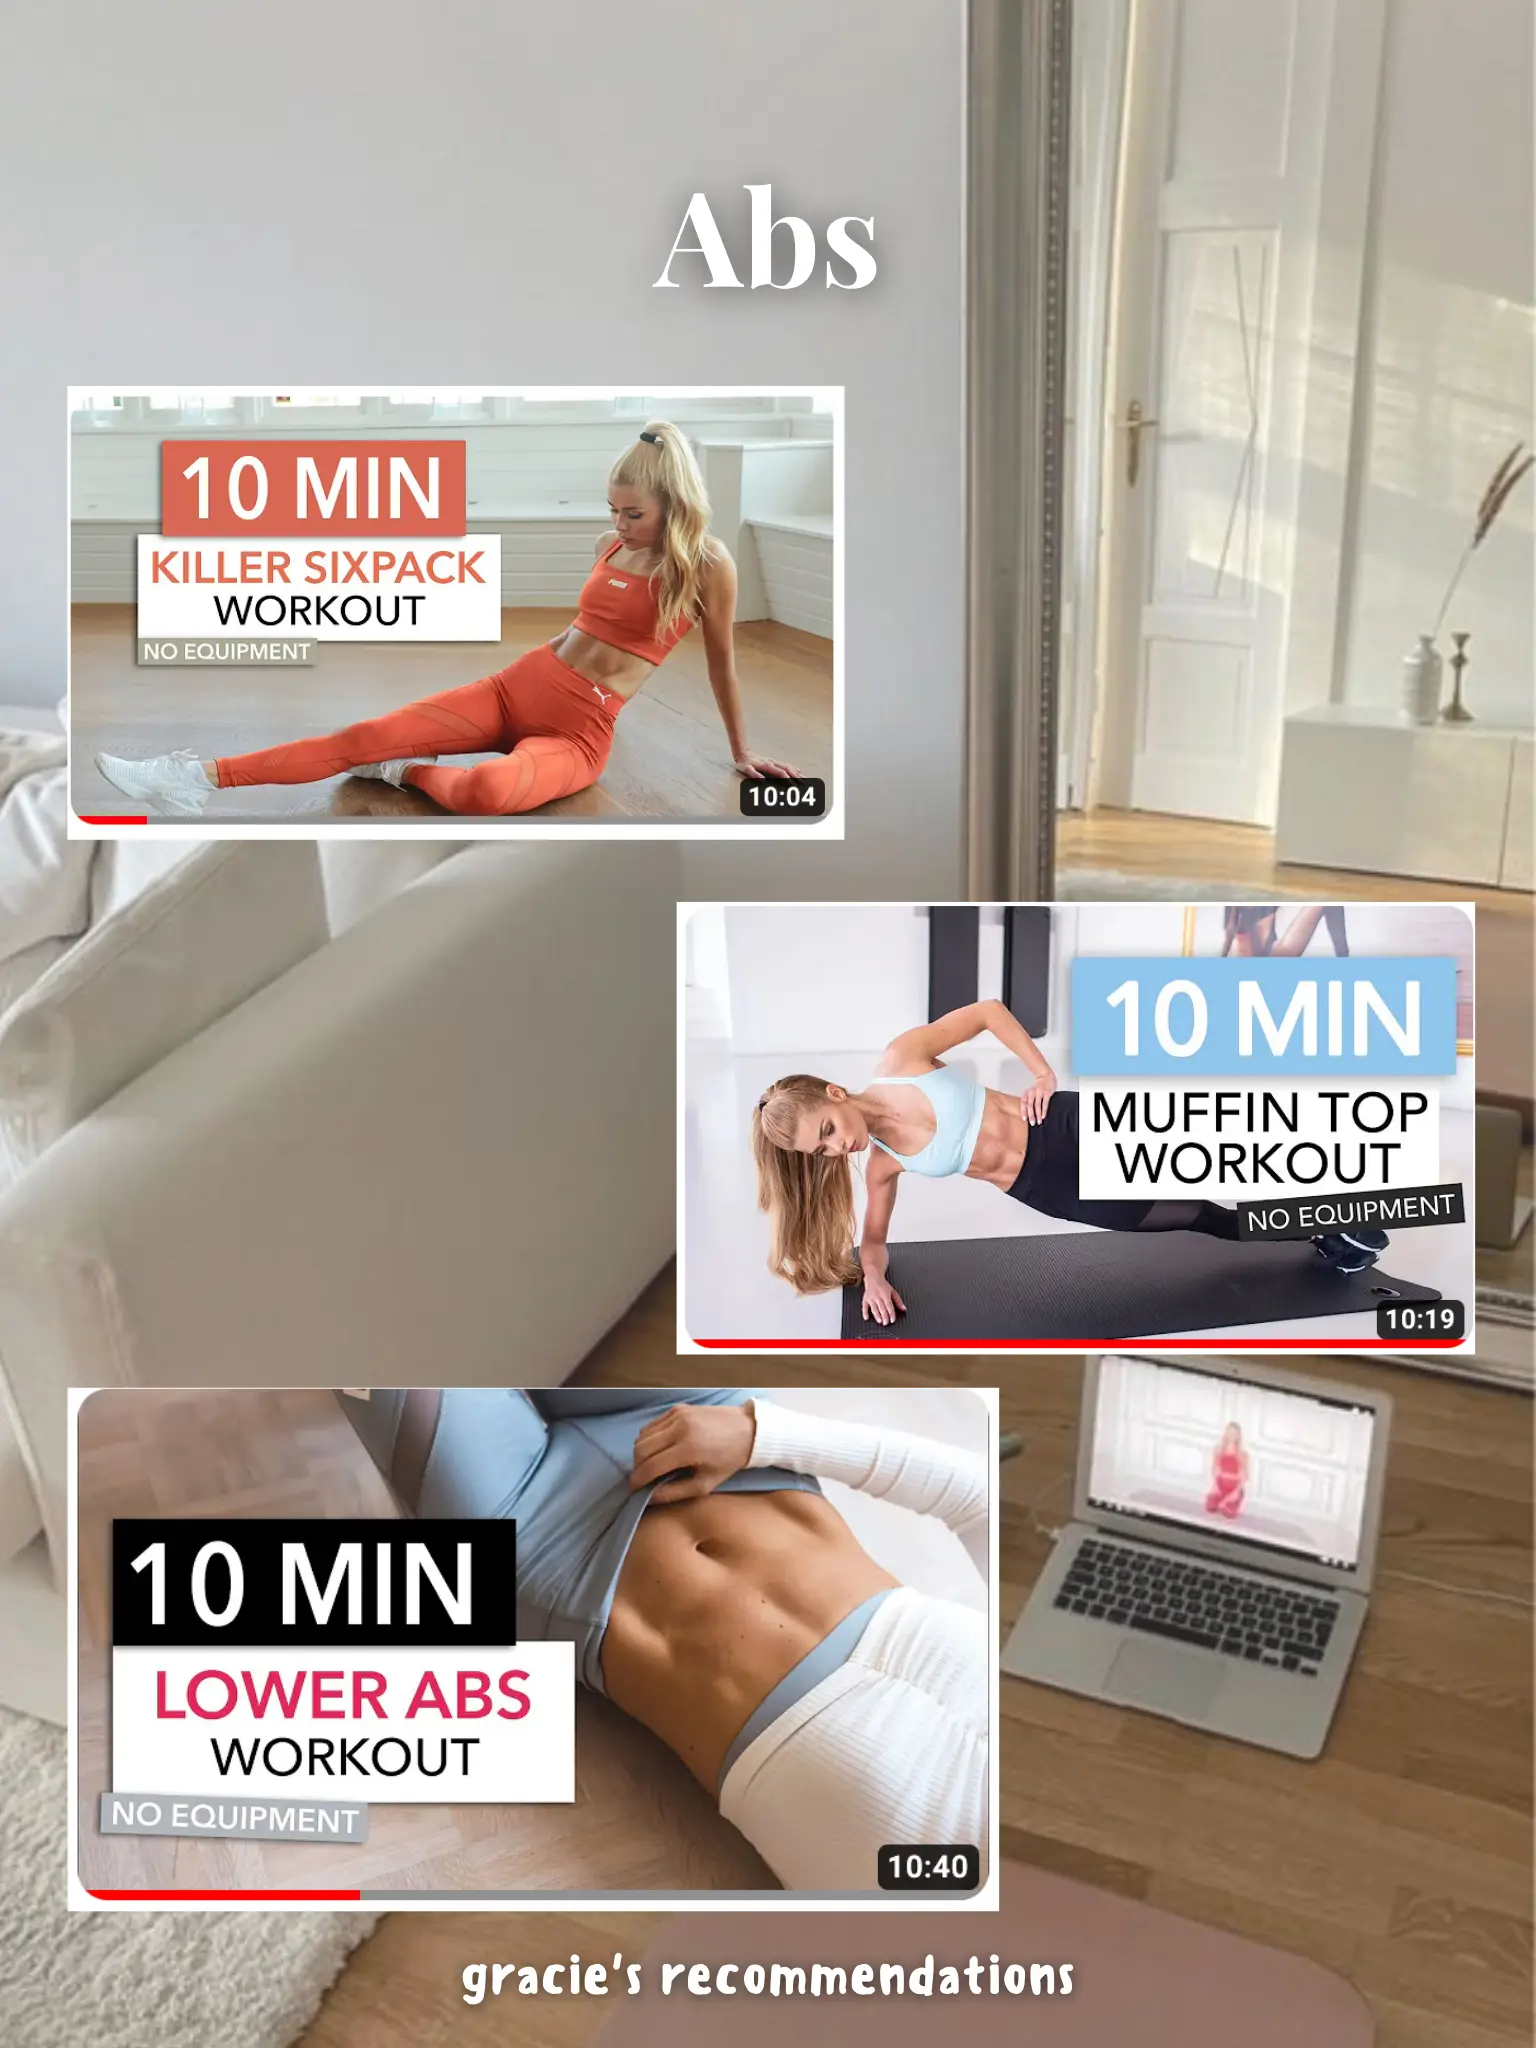 I lost 10KG just by following these videos?! 's images(3)